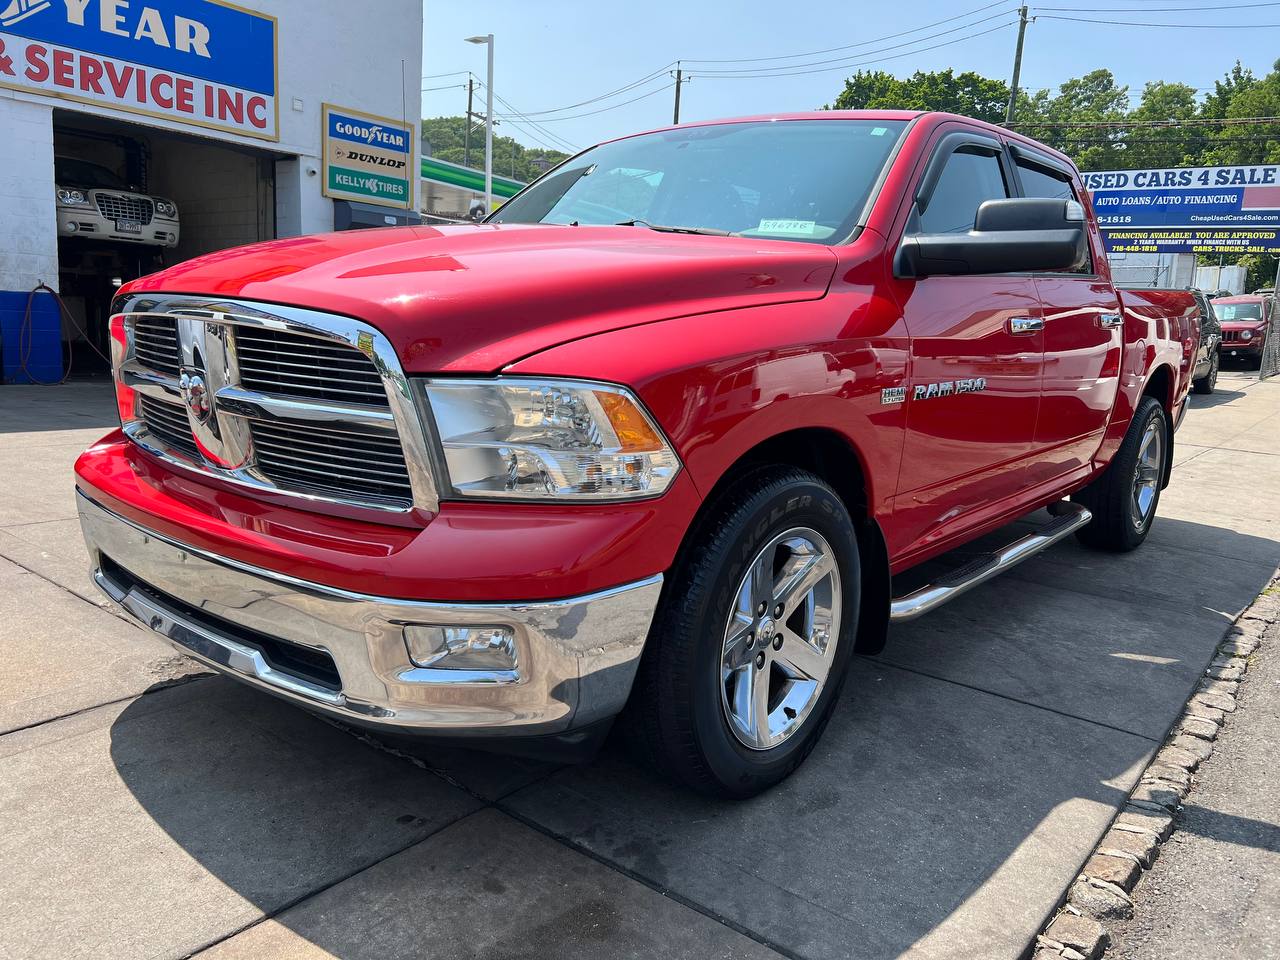 Used Car - 2012 RAM 1500 Big Horn 4x4 for Sale in Staten Island, NY